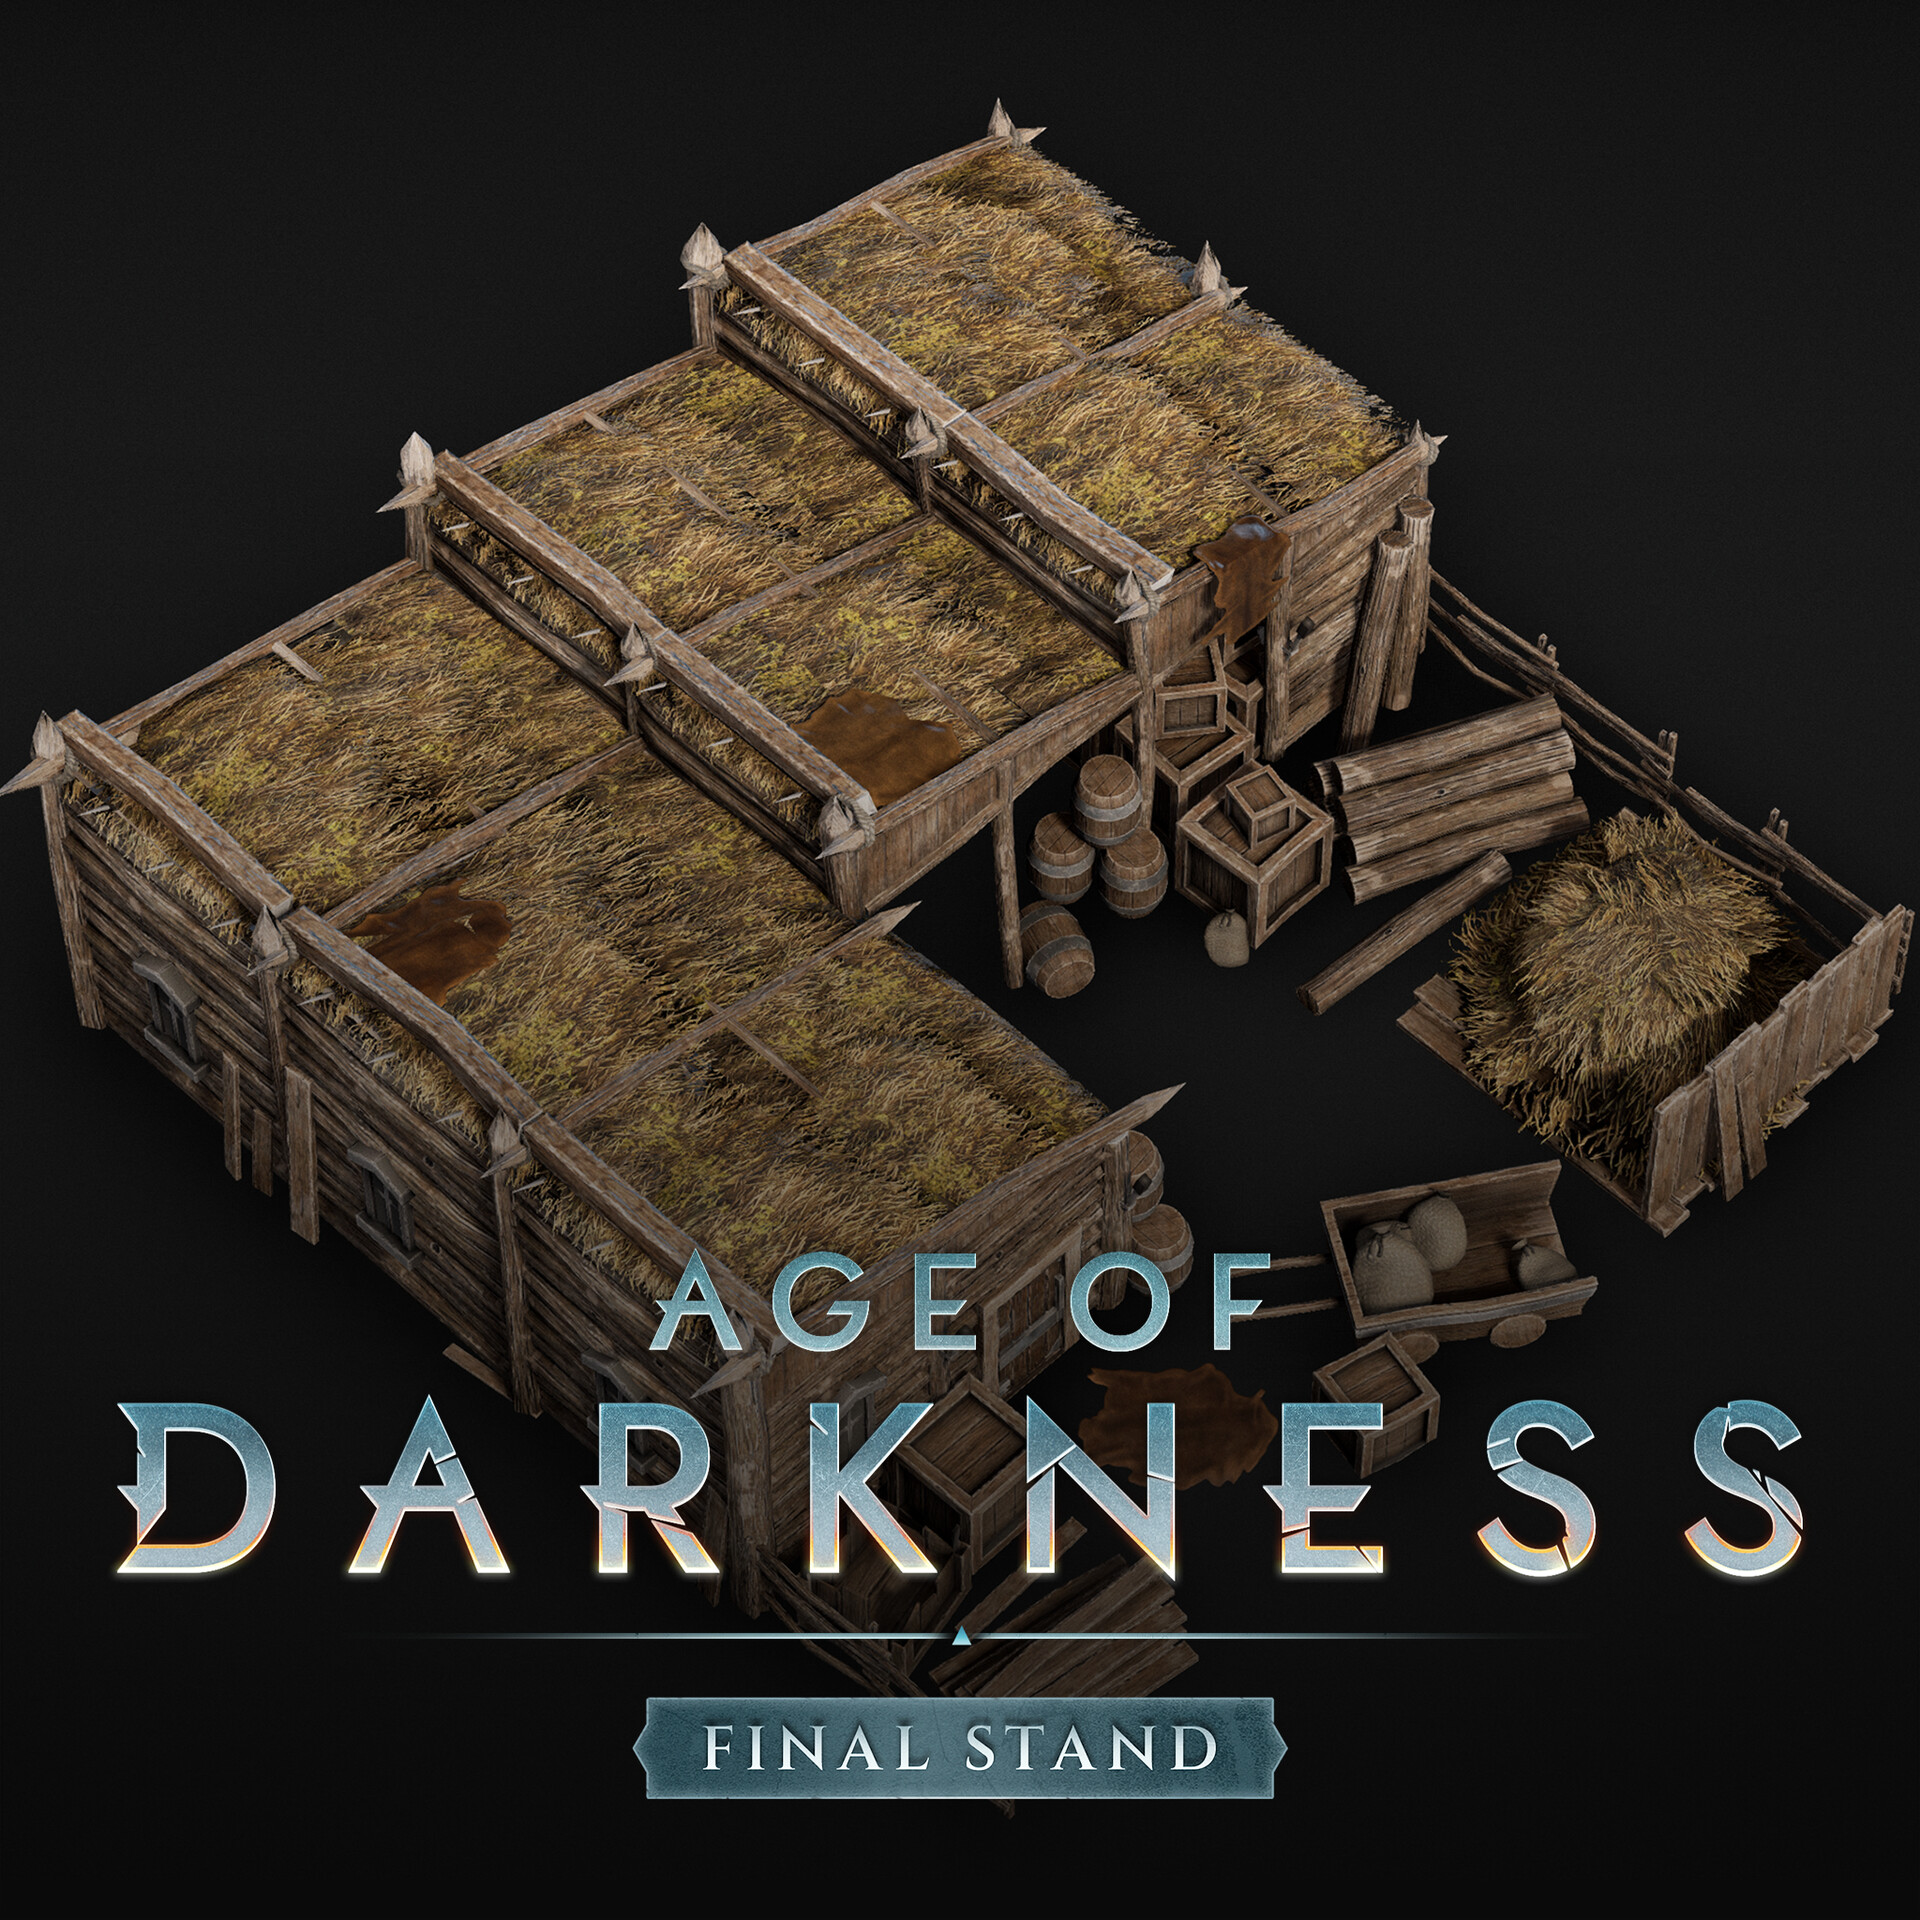 Age of darkness final stand steam фото 64